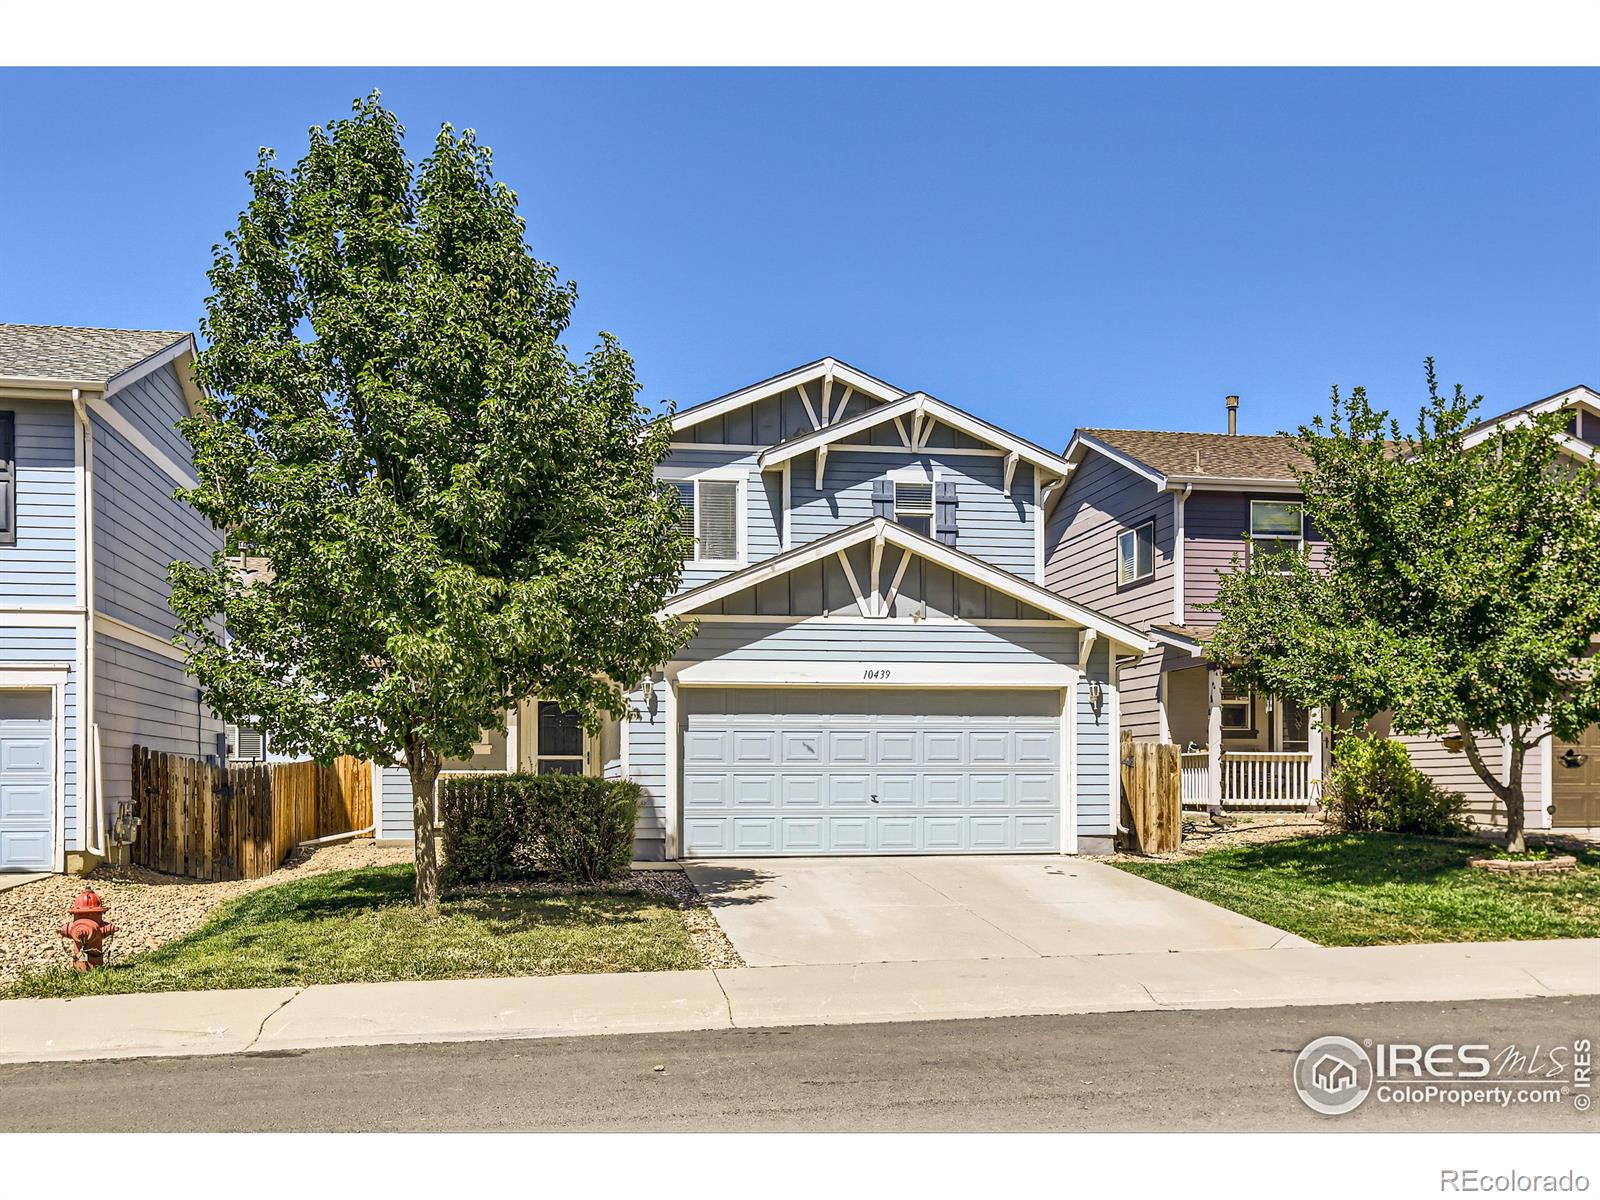 10439  Forester Place, longmont MLS: 123456789994400 Beds: 3 Baths: 3 Price: $449,000